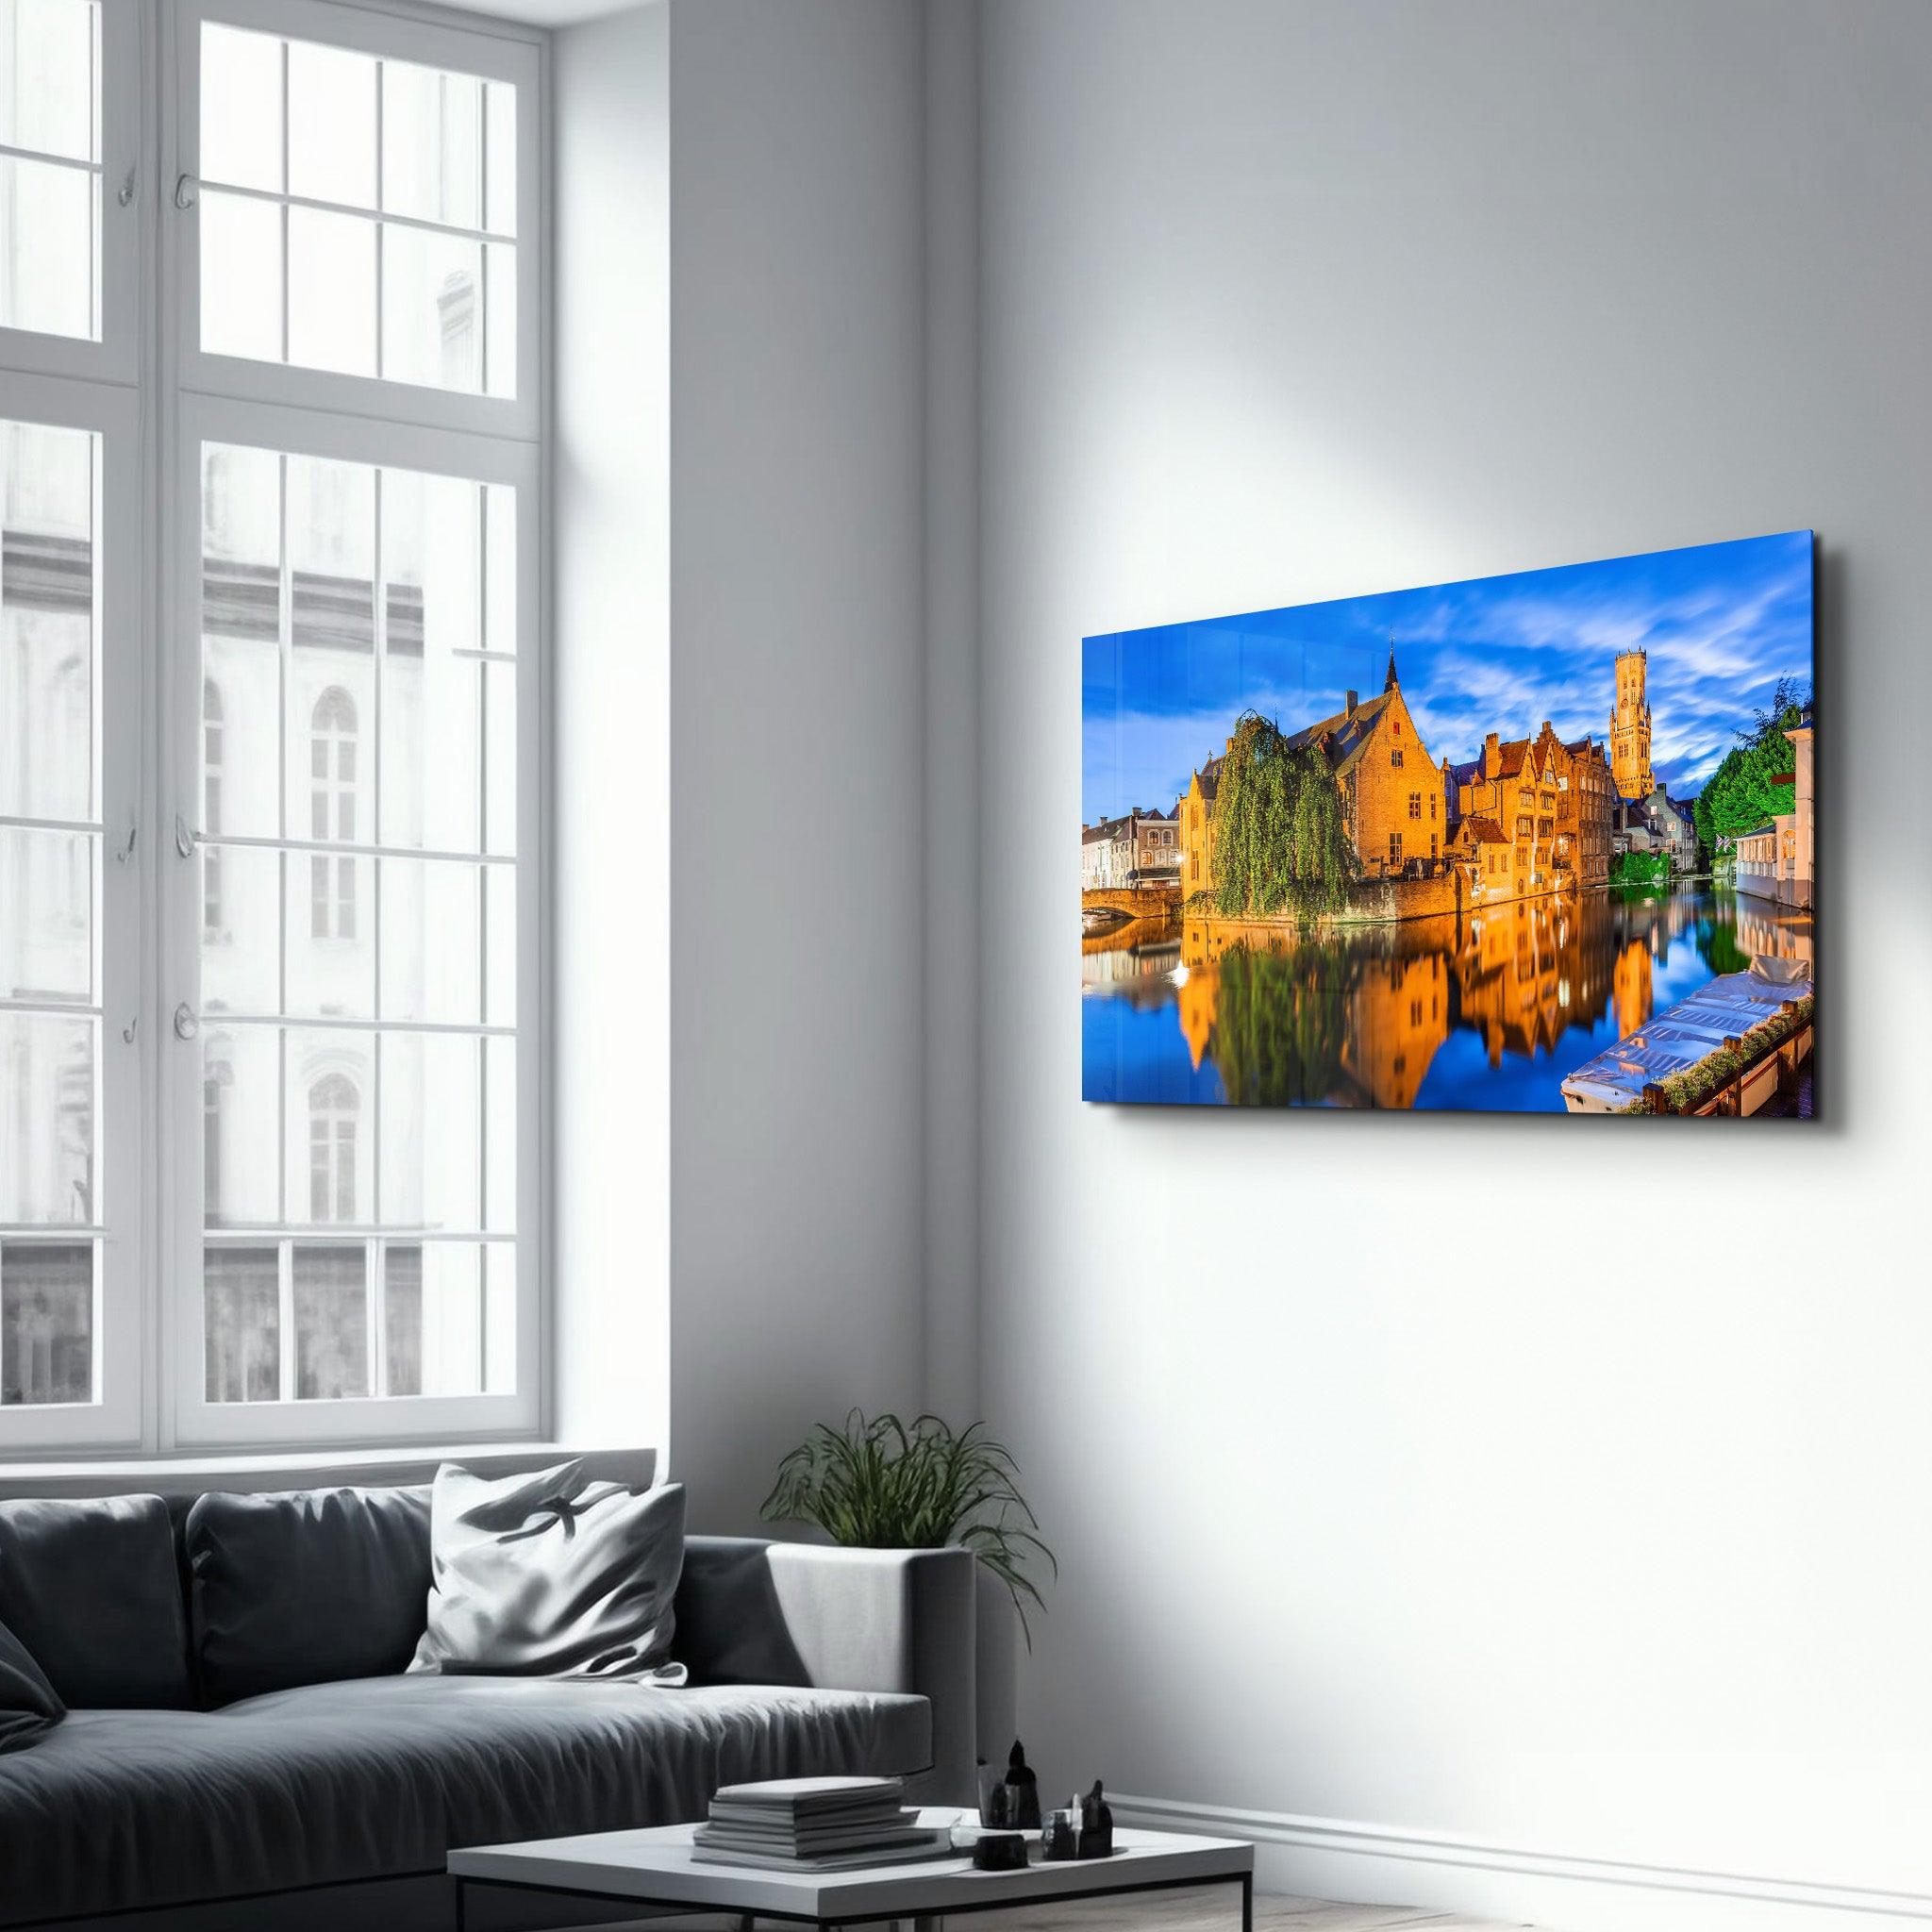 Bruges, Belgium. The Rozenhoedkaai canal in Bruges with the Belfry | Glass Wall Art - ArtDesigna Glass Printing Wall Art